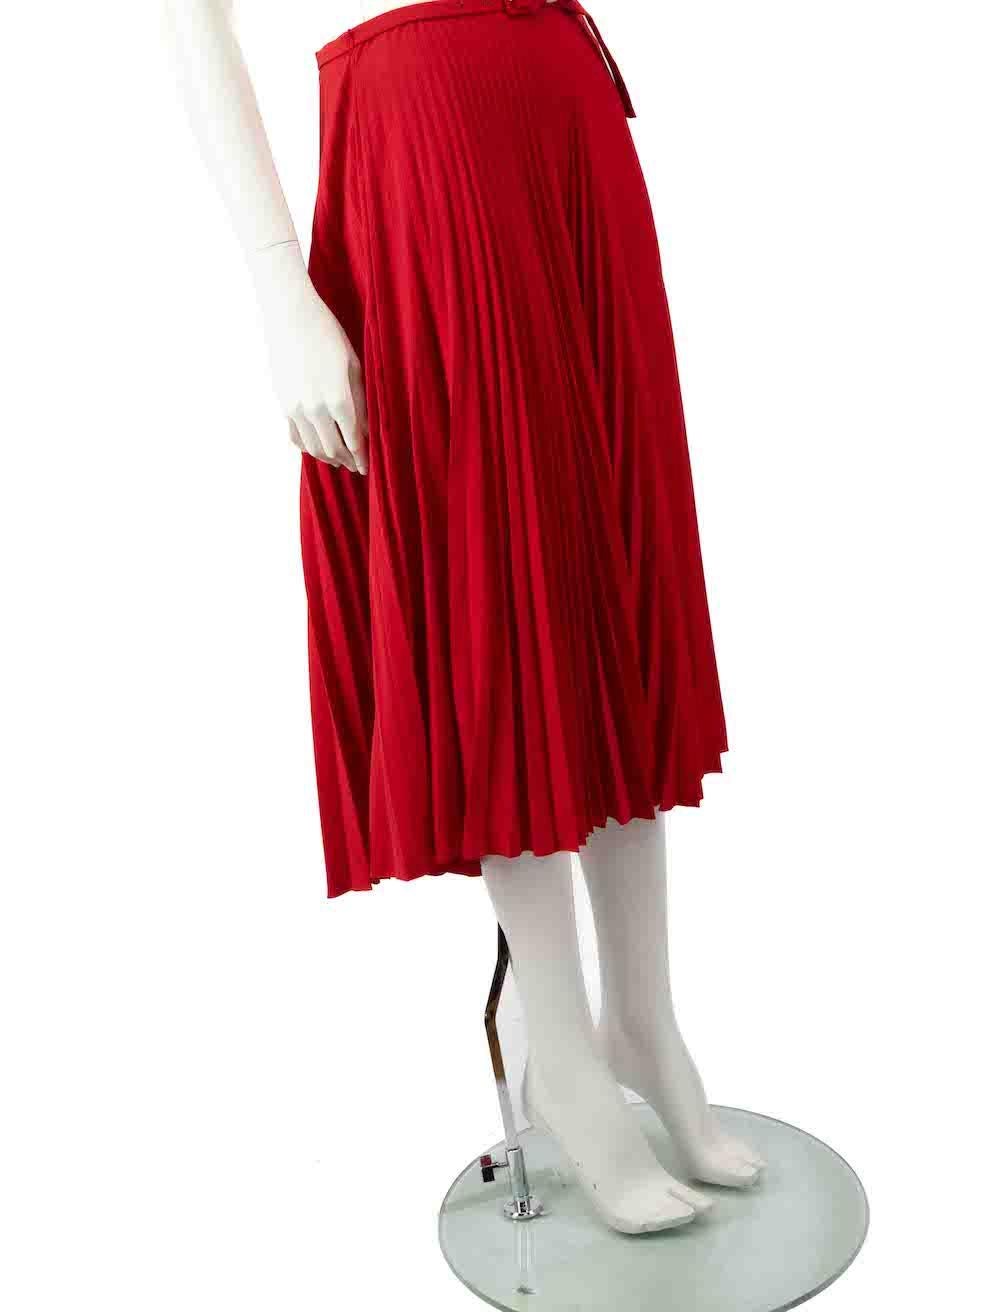 CONDITION is Very good. Hardly any visible wear to skirt is evident. However, the composition label is missing on this used Prada designer resale item.
 
 
 
 Details
 
 
 Red
 
 Synthetic
 
 Skirt
 
 Midi
 
 Pleated
 
 Side zip and hook fastening
